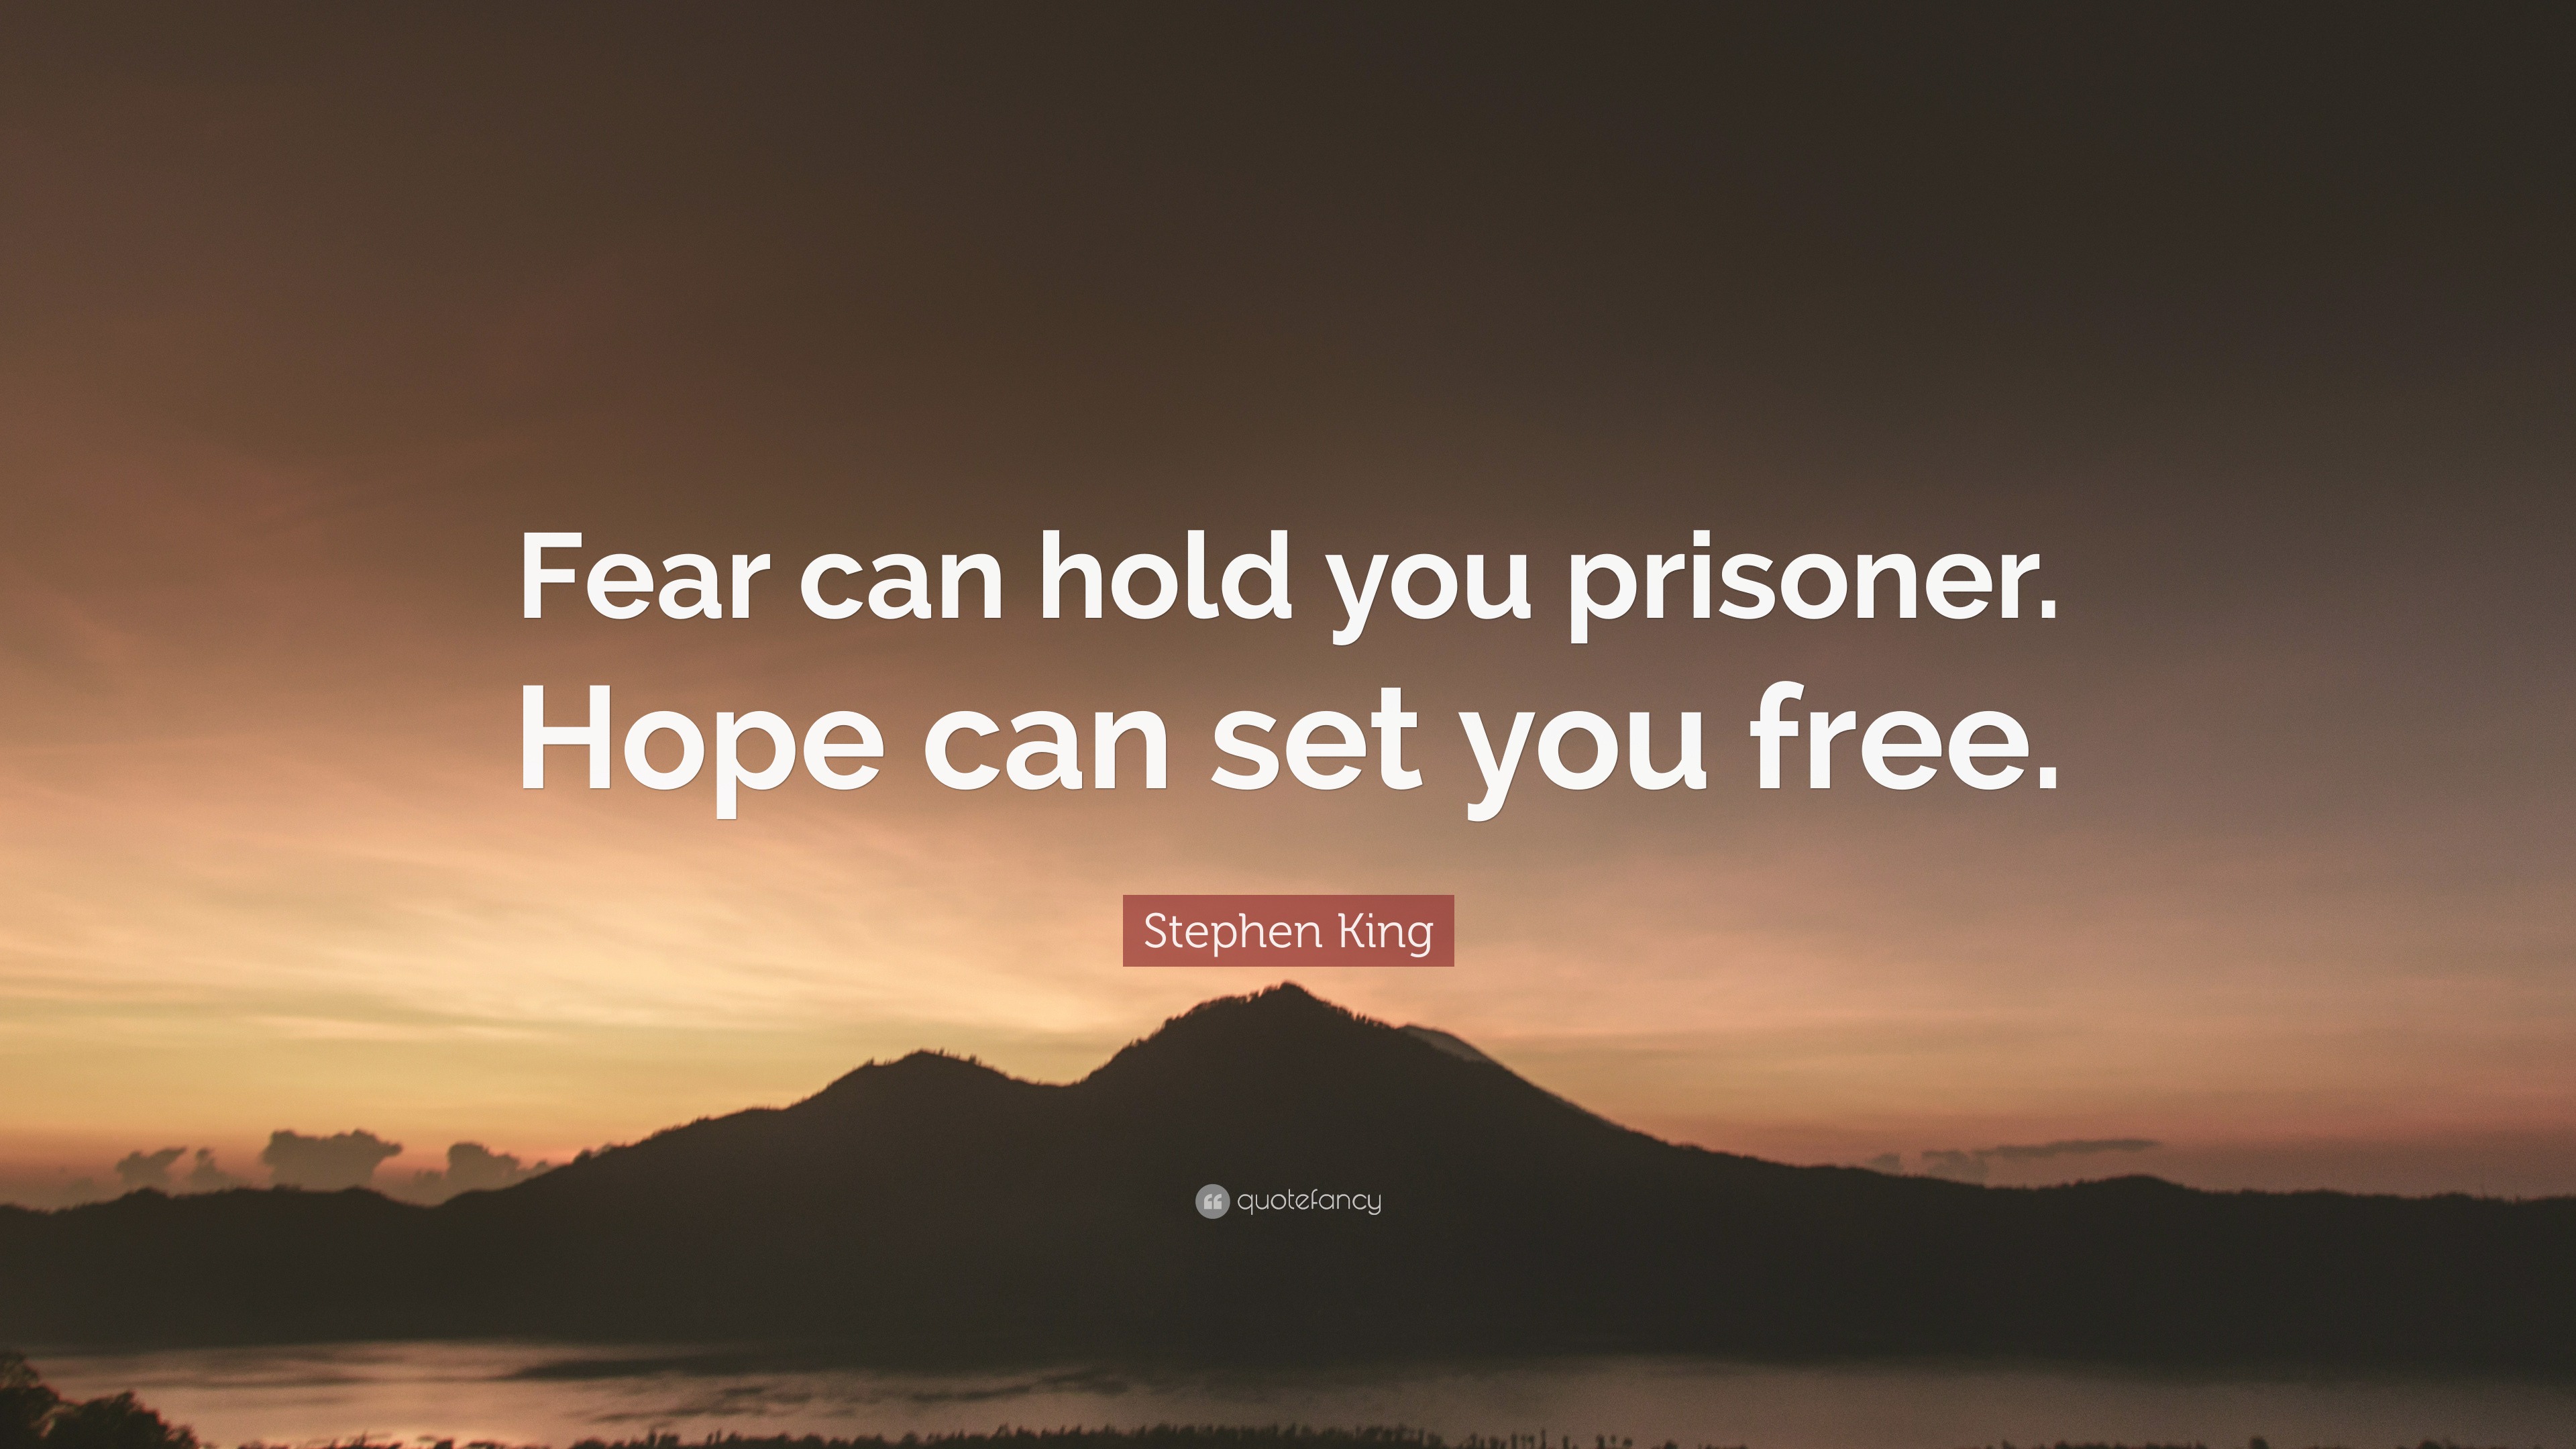 Stephen King Quote: “Fear can hold you prisoner. Hope can set you free